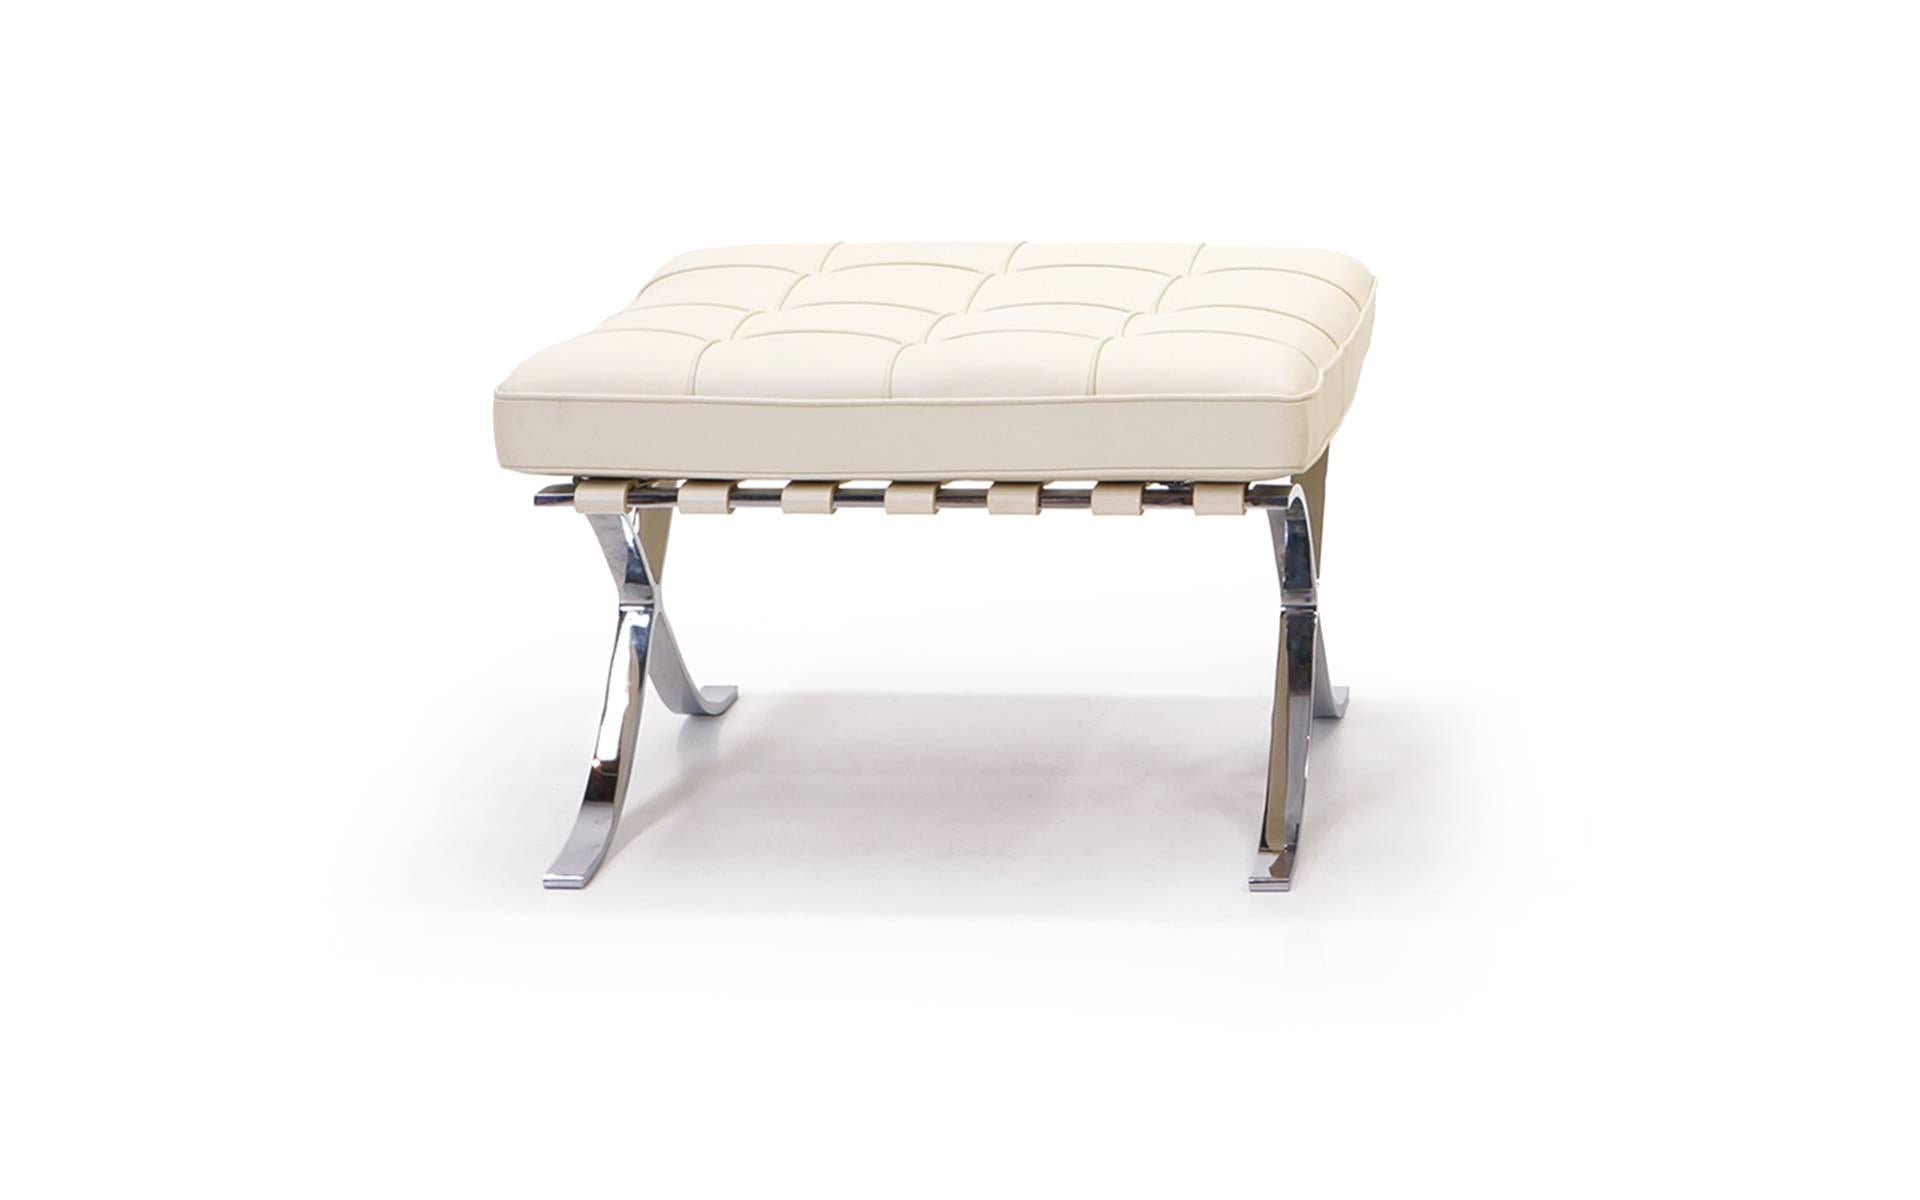 Authentic, signed, chromed steel frame Barcelona ottoman in beautiful ivory white leather. Recent production. Like new condition.